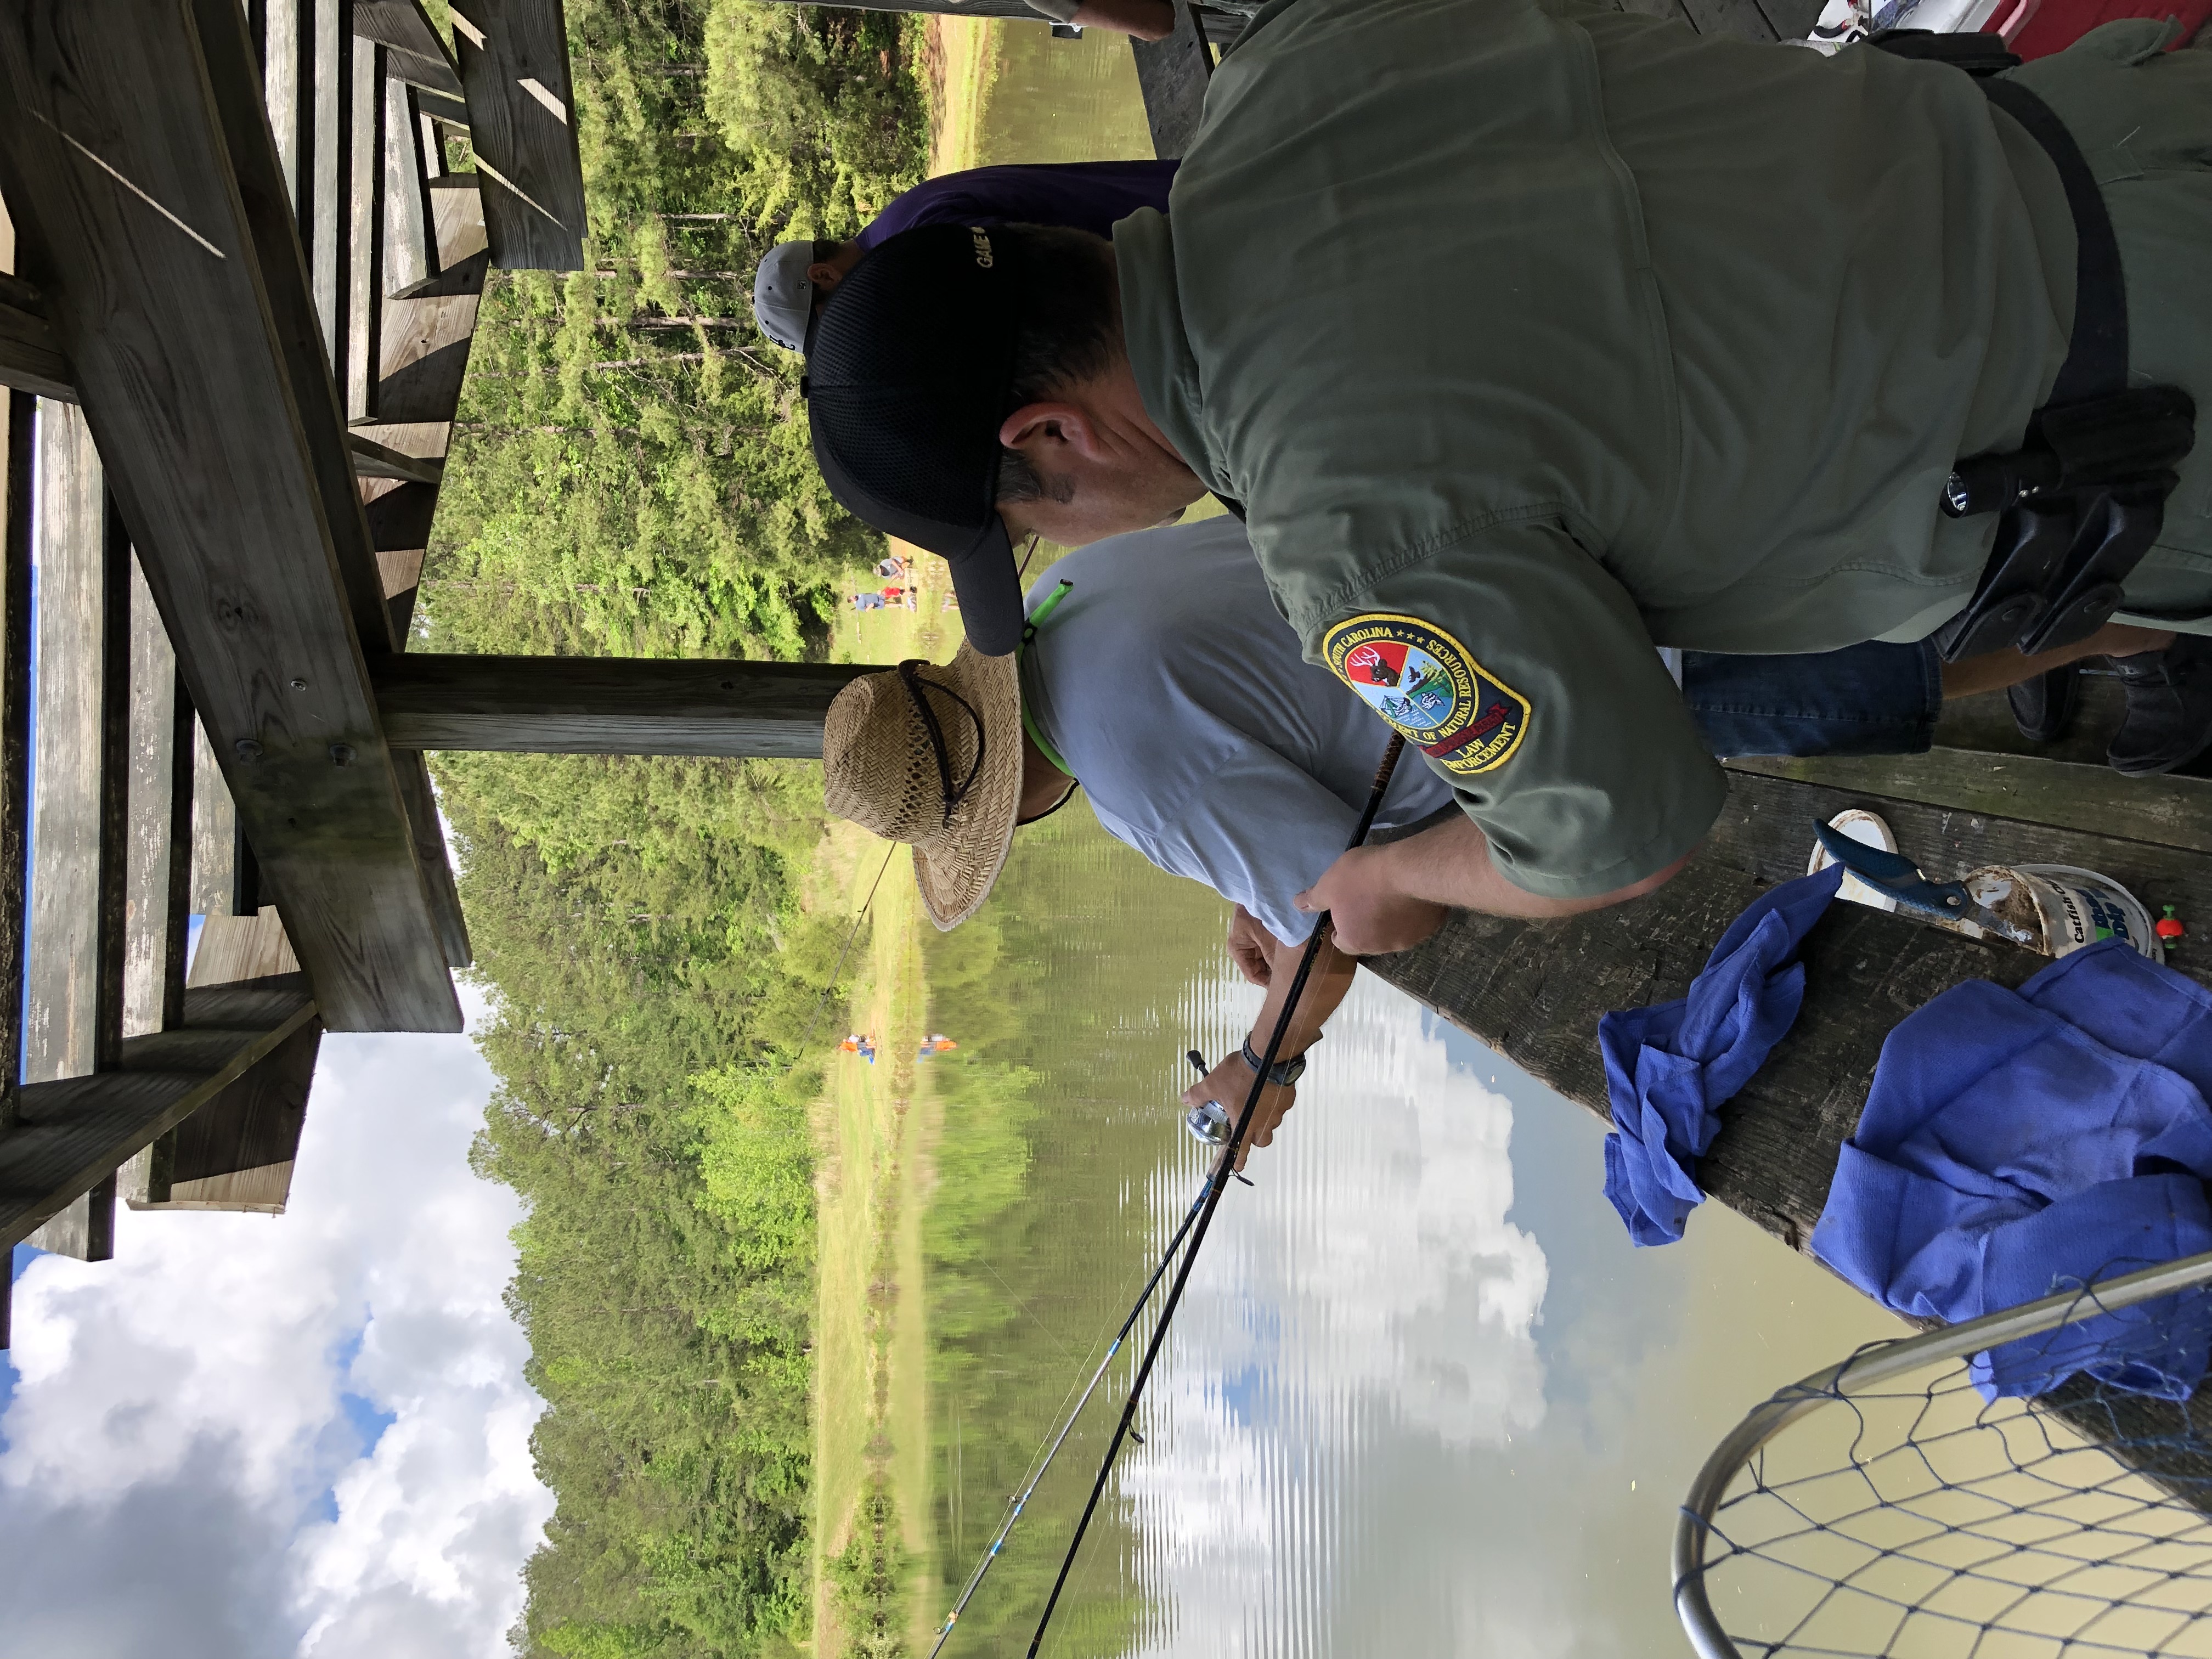 SCDNR officer assisting at fishing event